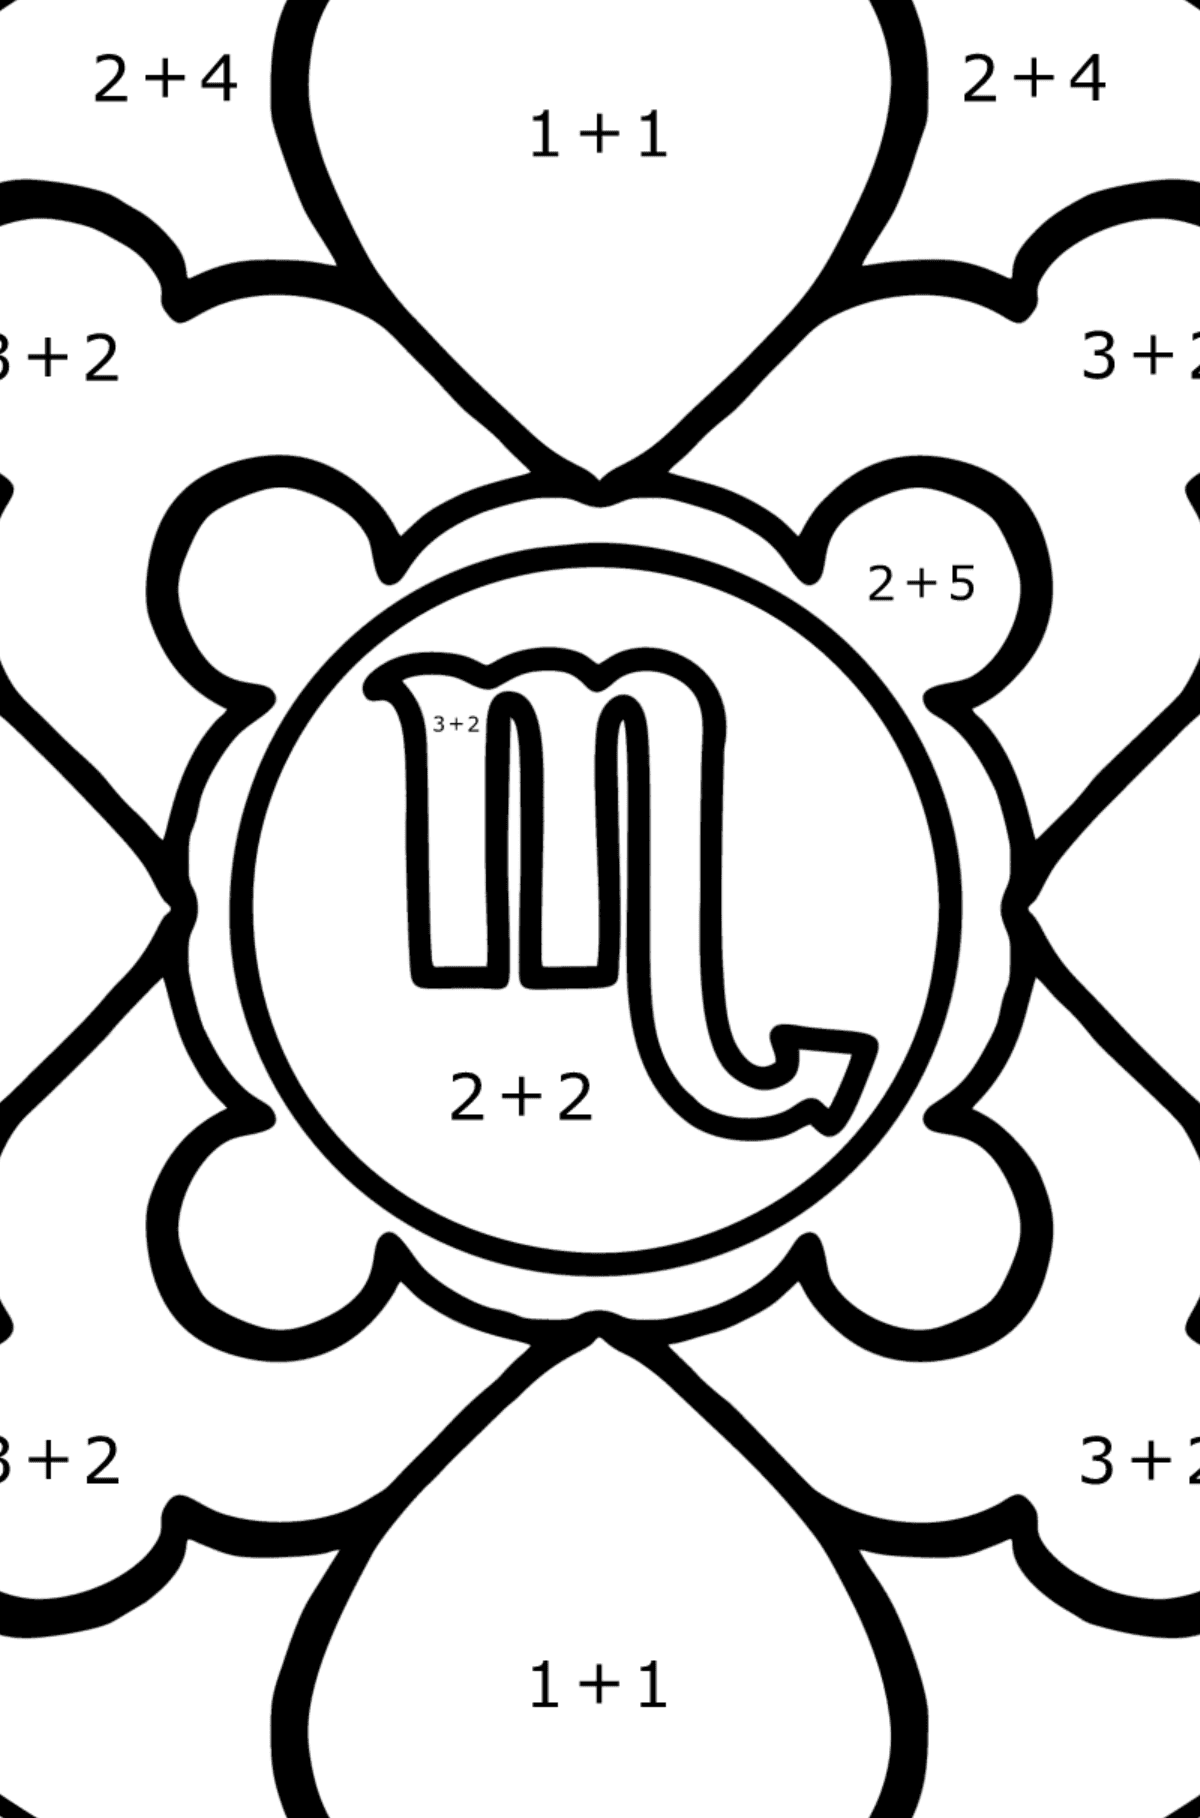 Coloring page - zodiac sign Scorpio - Math Coloring - Addition for Kids